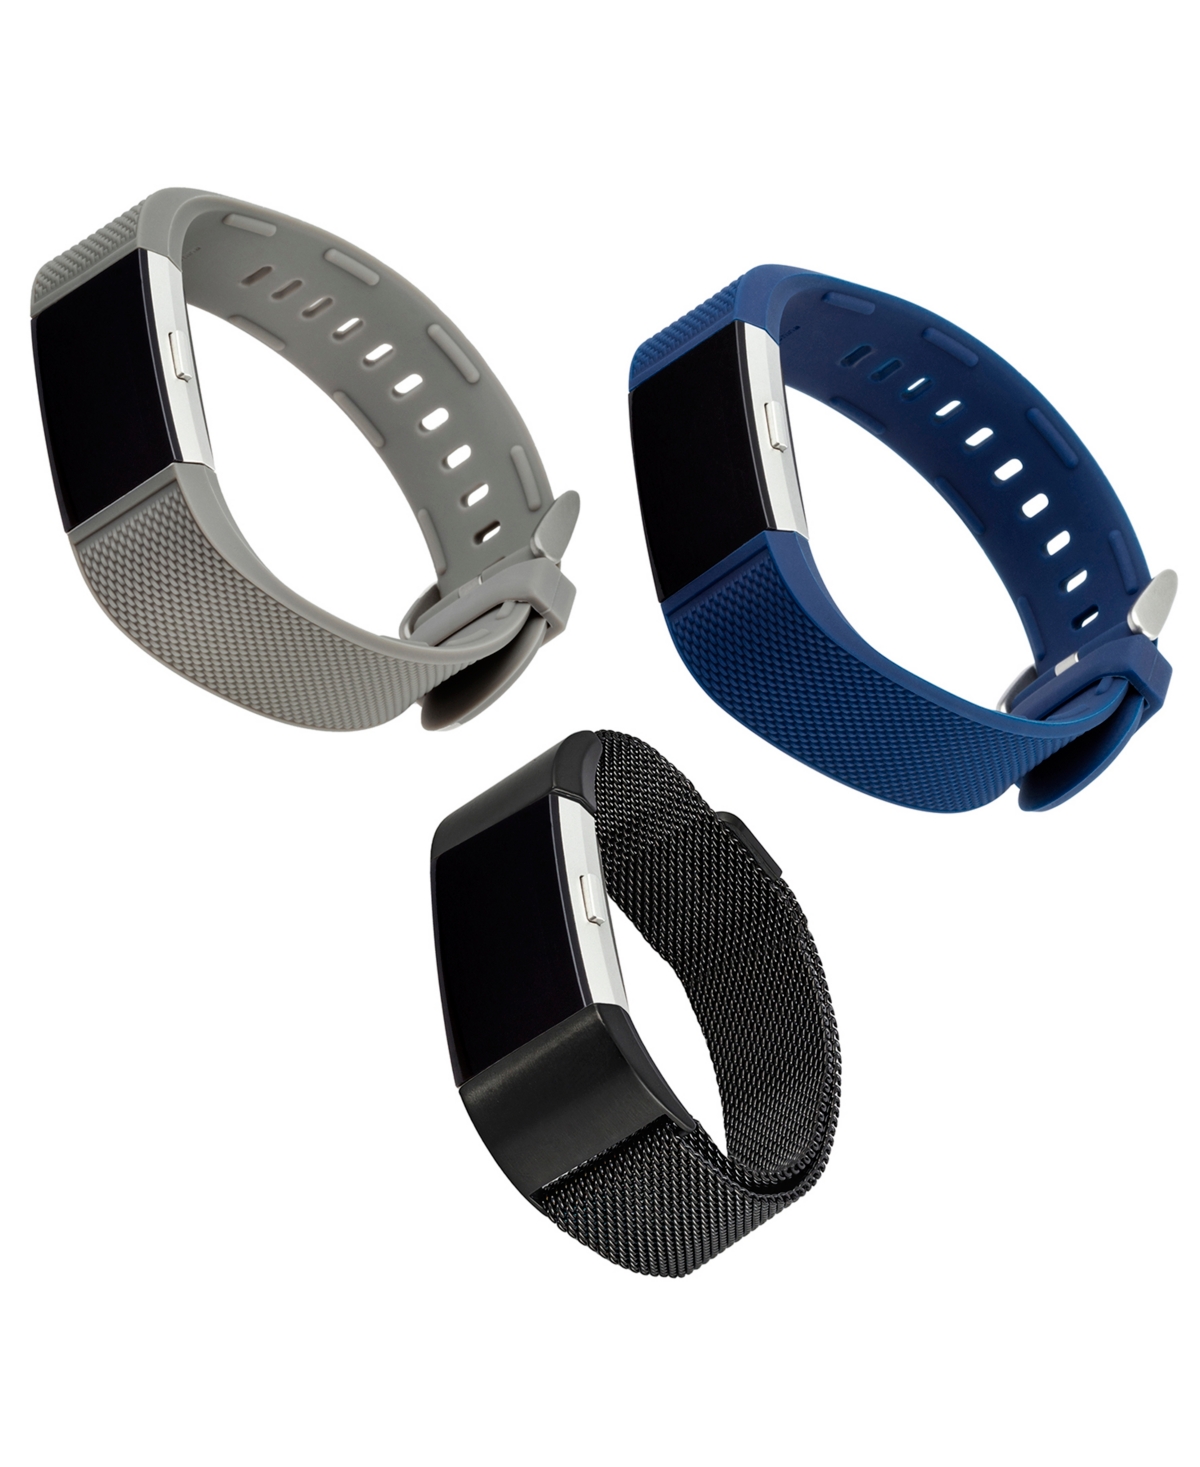 Gray and Blue Woven Silicone Band, Black Stainless Steel Mesh Band Set, 3 Piece Compatible with the Fitbit Charge 2 - Gray, Black, Blue